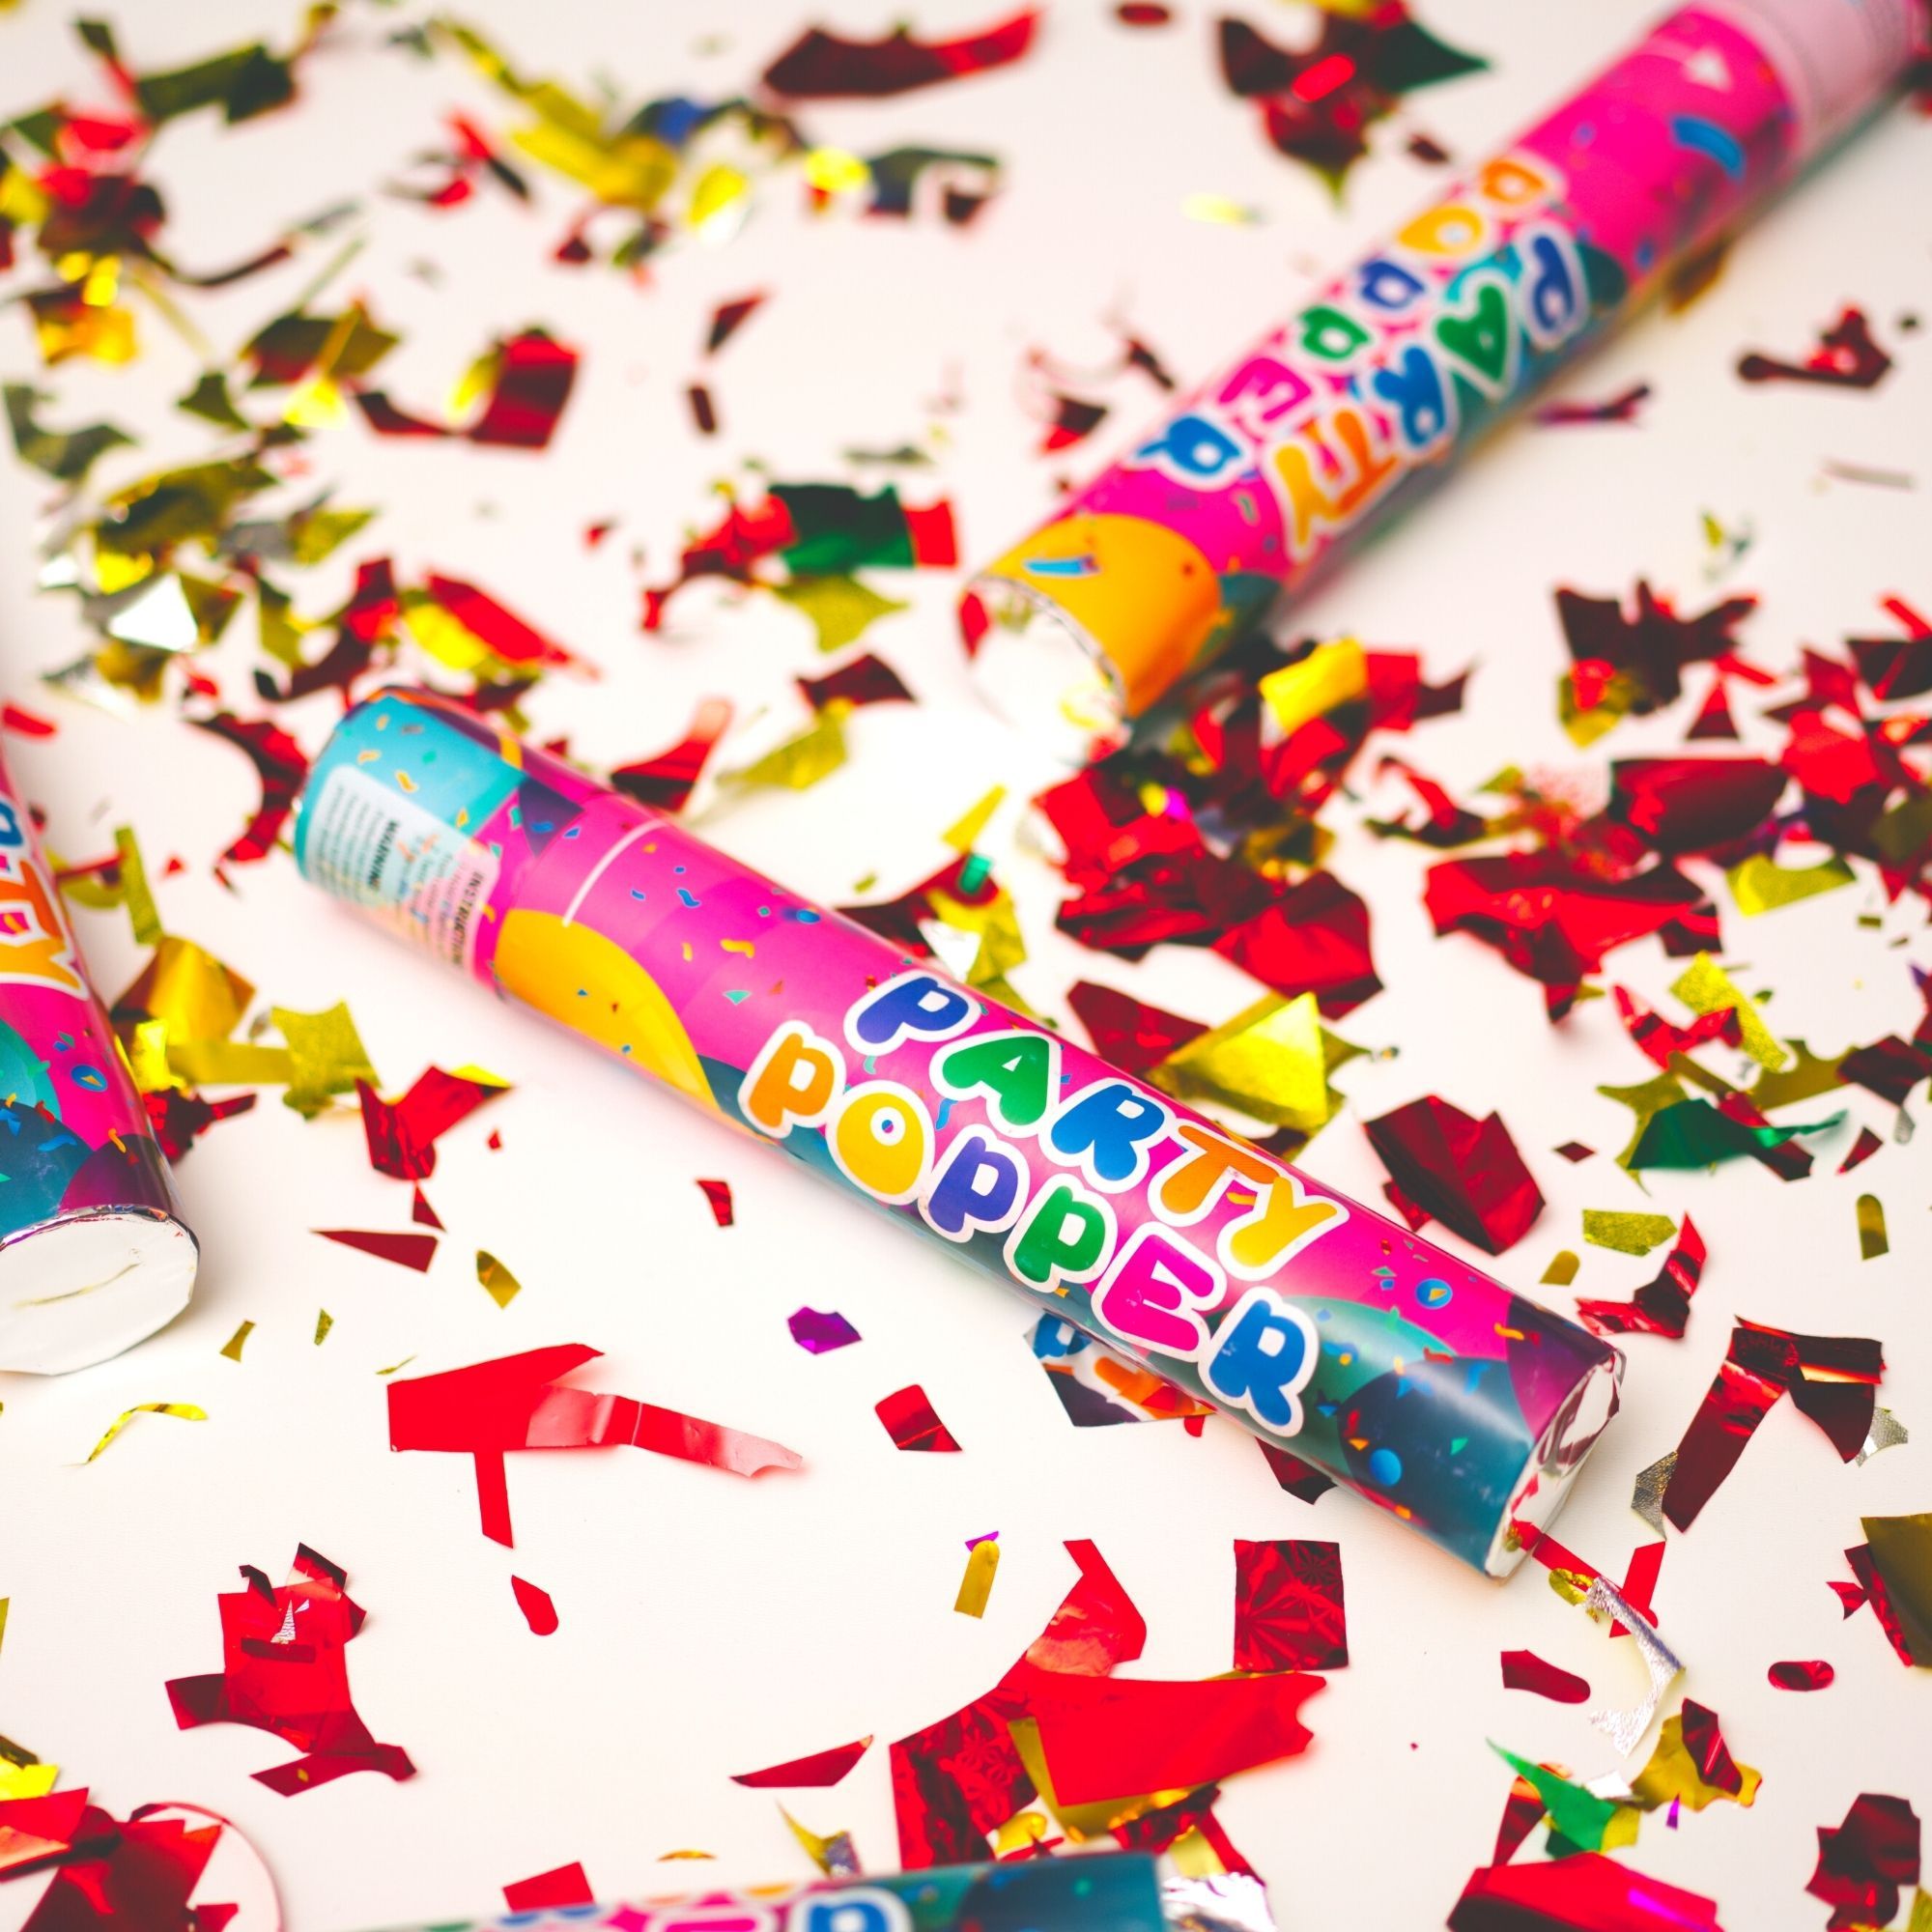 confetti cannon surrounded by red and gold confetti